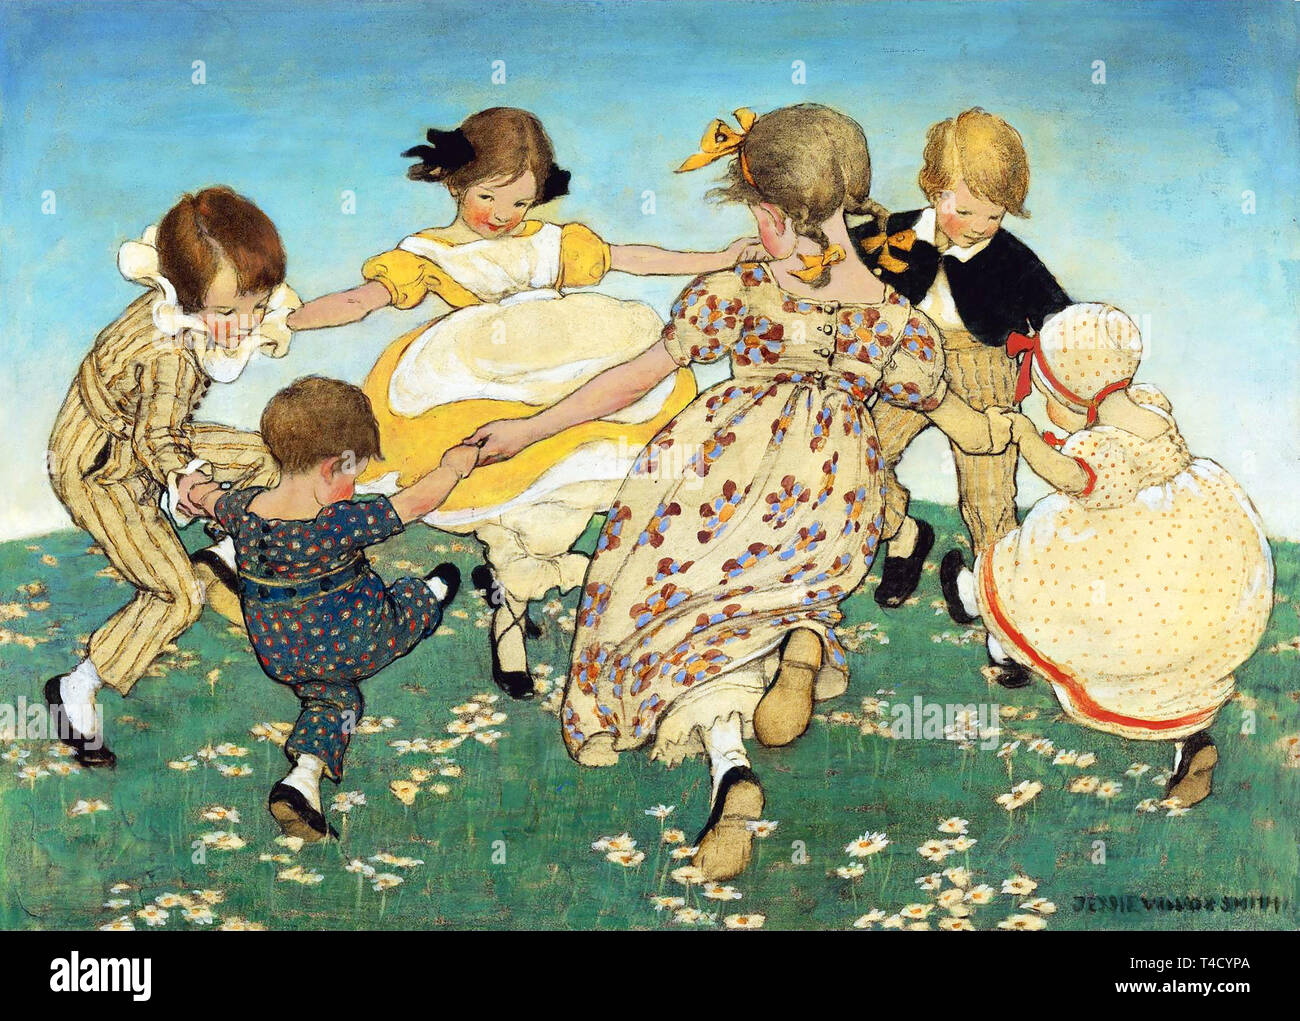 Ring of Roses by Jessie Wilcox Smith Stock Photo